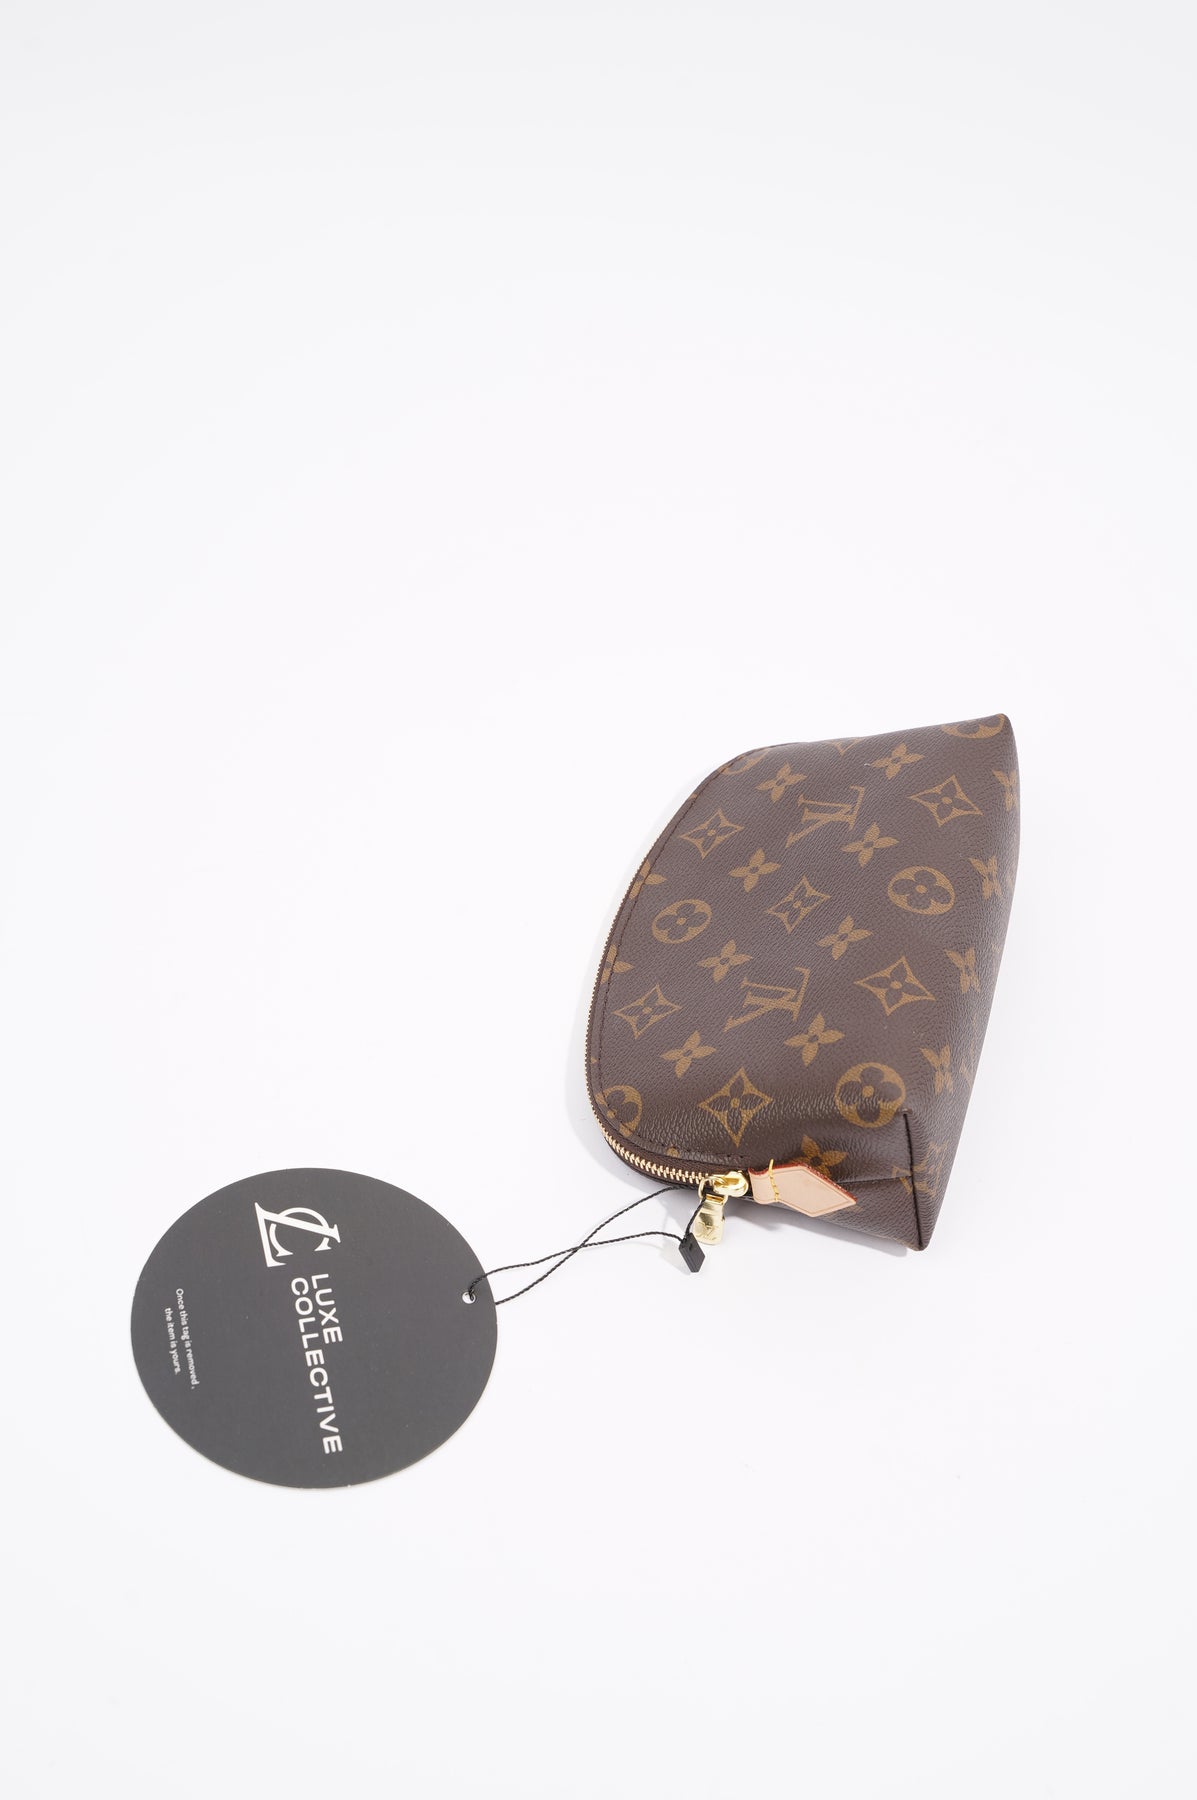 Louis Vuitton Womens Cosmetic Pouch Monogram PM – Luxe Collective